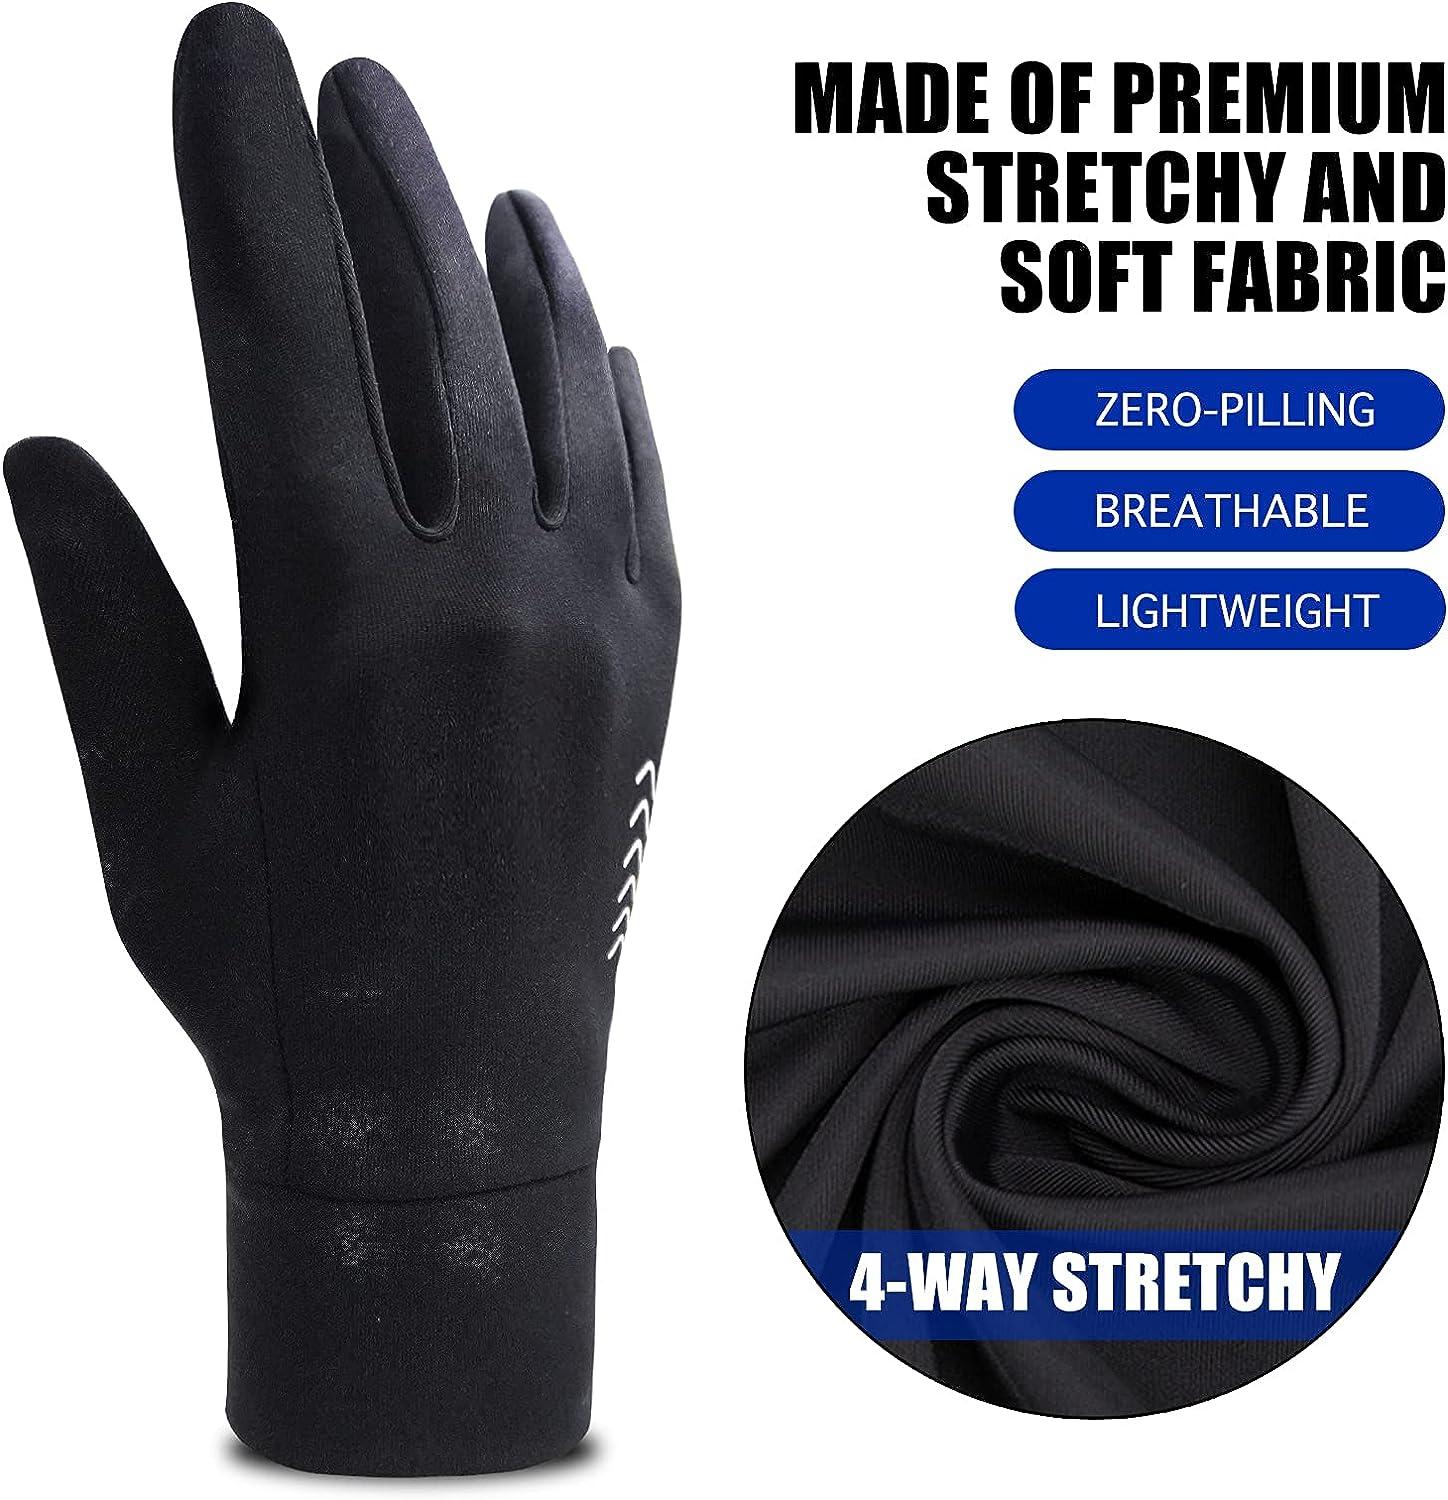 ATERCEL Winter Gloves for Men, Women, Updated Touch Screen Glove,  Waterproof Warm Gloves in Cold Weather for Running, Cycling, Driving,  Working Black Medium